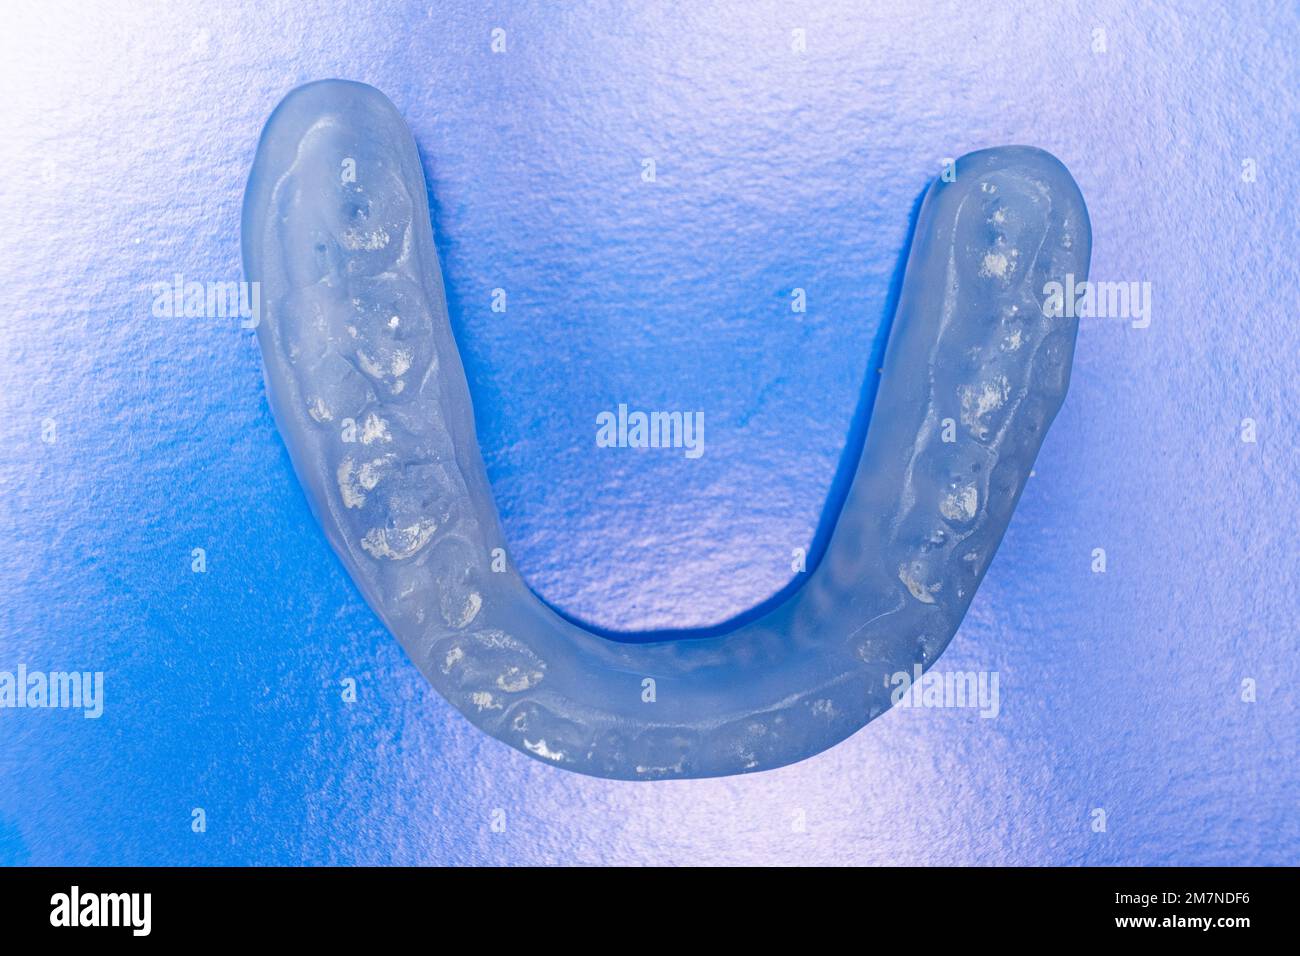 Dental mouthguard, splint for the treatment of dysfunction of the temporomandibular joints, bruxism, malocclusion, to relax the muscles of the jaw. Stock Photo